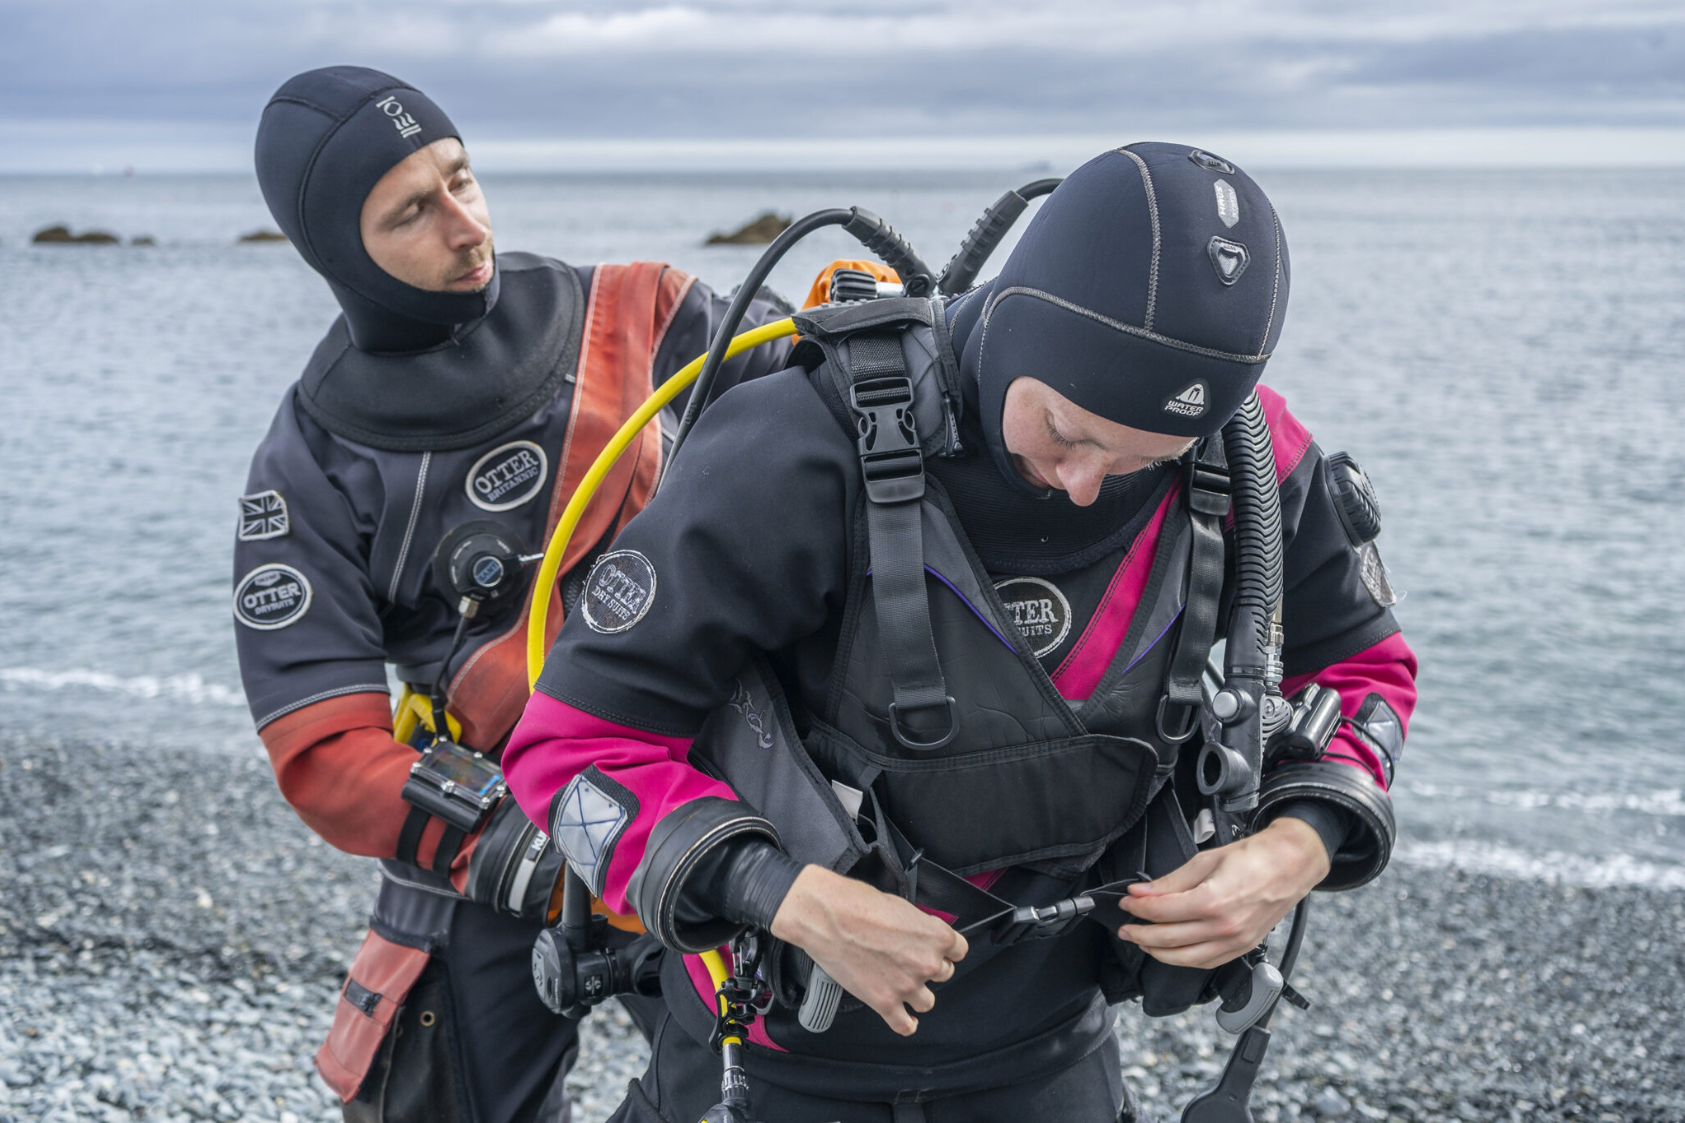 Image of divers putting on their drysuits for cold water diving